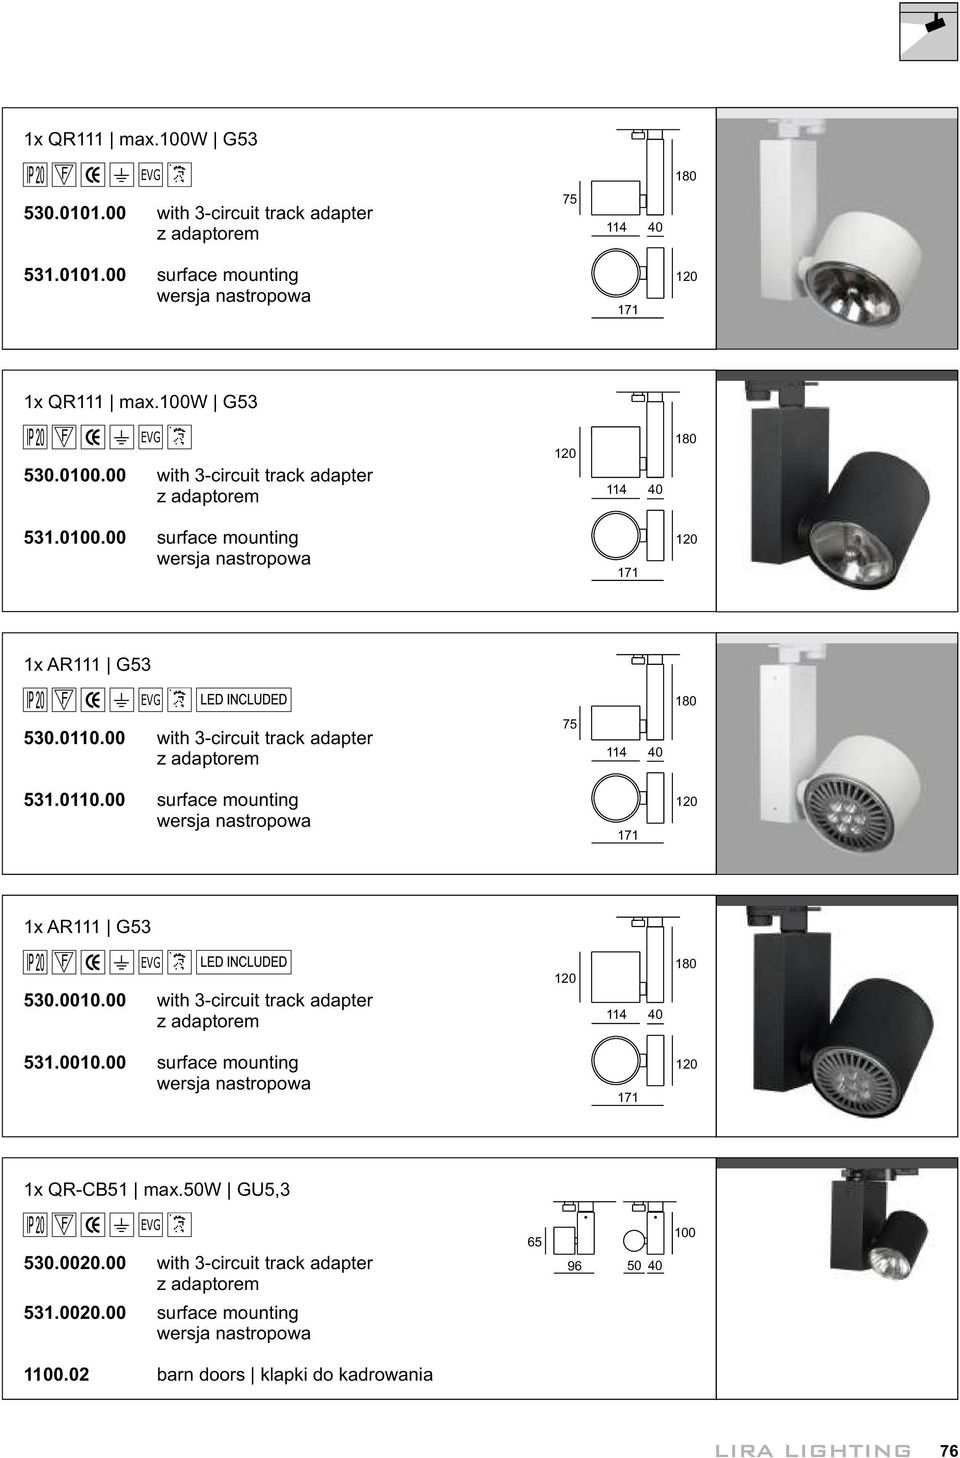 1. with 3-circuit track adapter 12 114 4 18 531.1. surface mounting 171 12 1x QR-CB51 max.5w GU5,3 53.2. with 3-circuit track adapter 531.